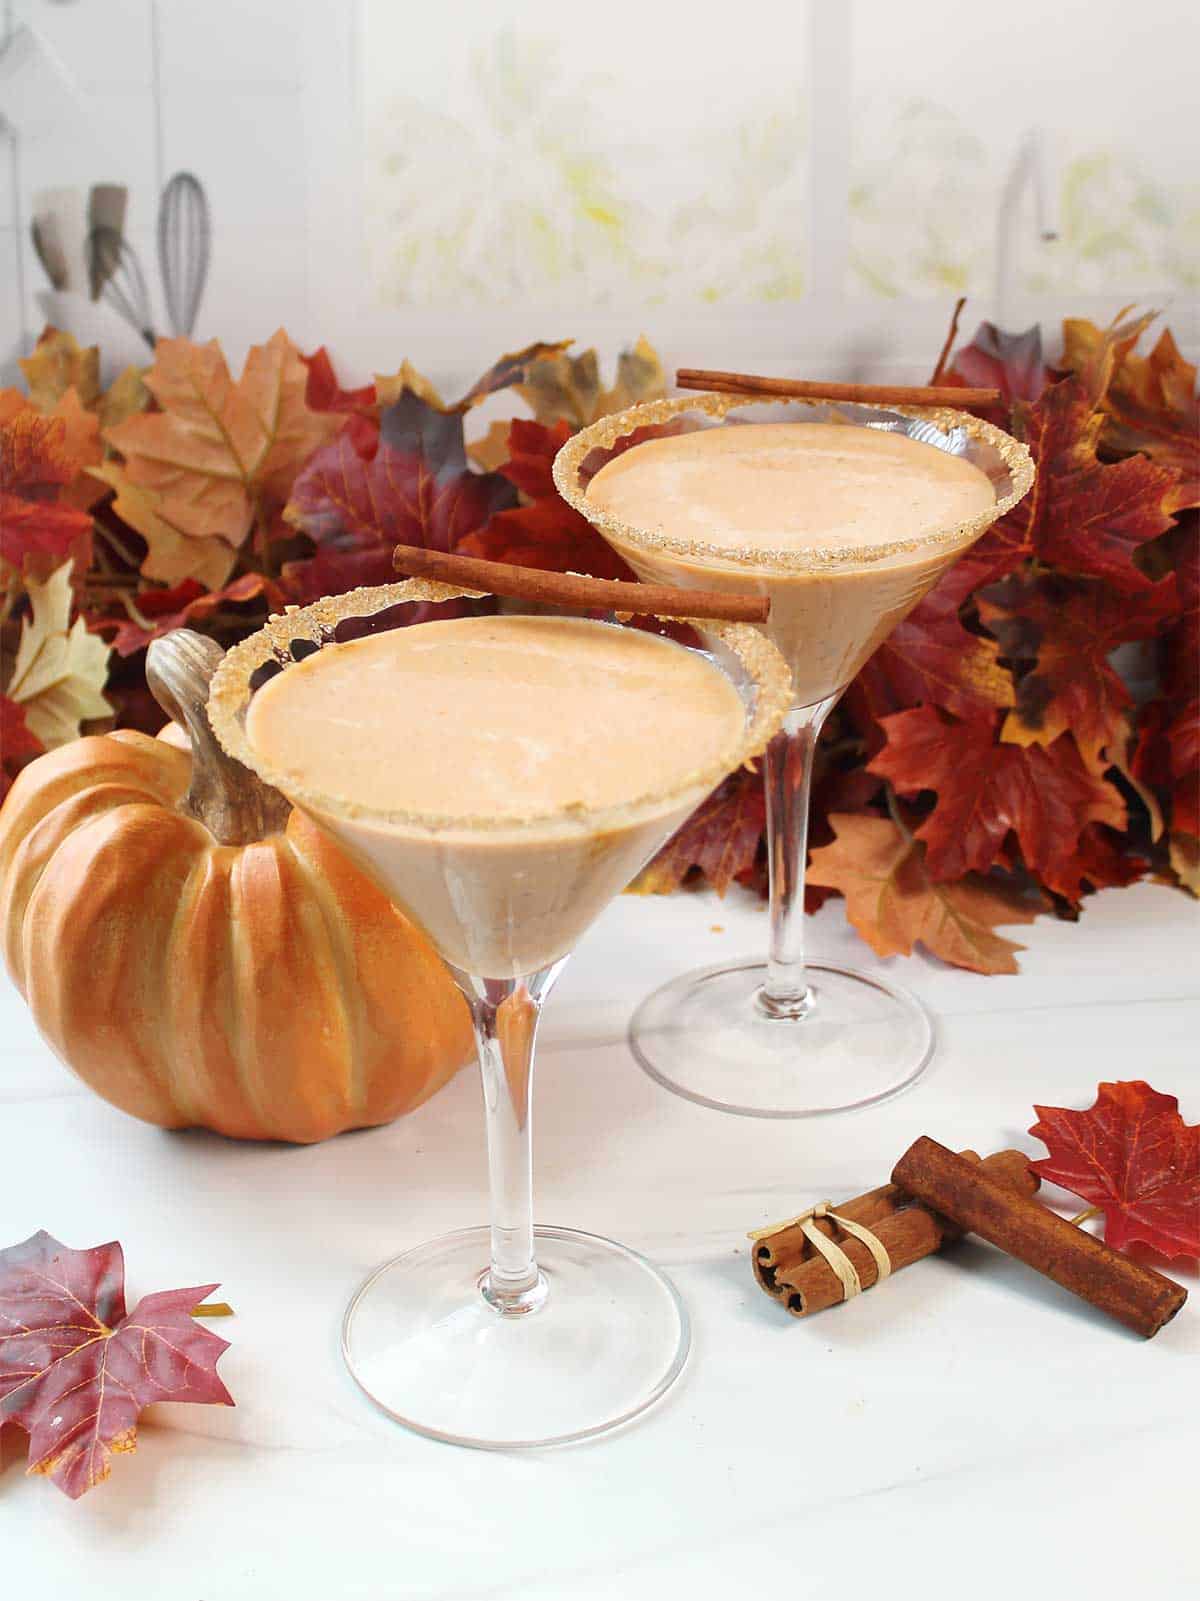 Two finished pumpkin spice martini cocktails without garnish.